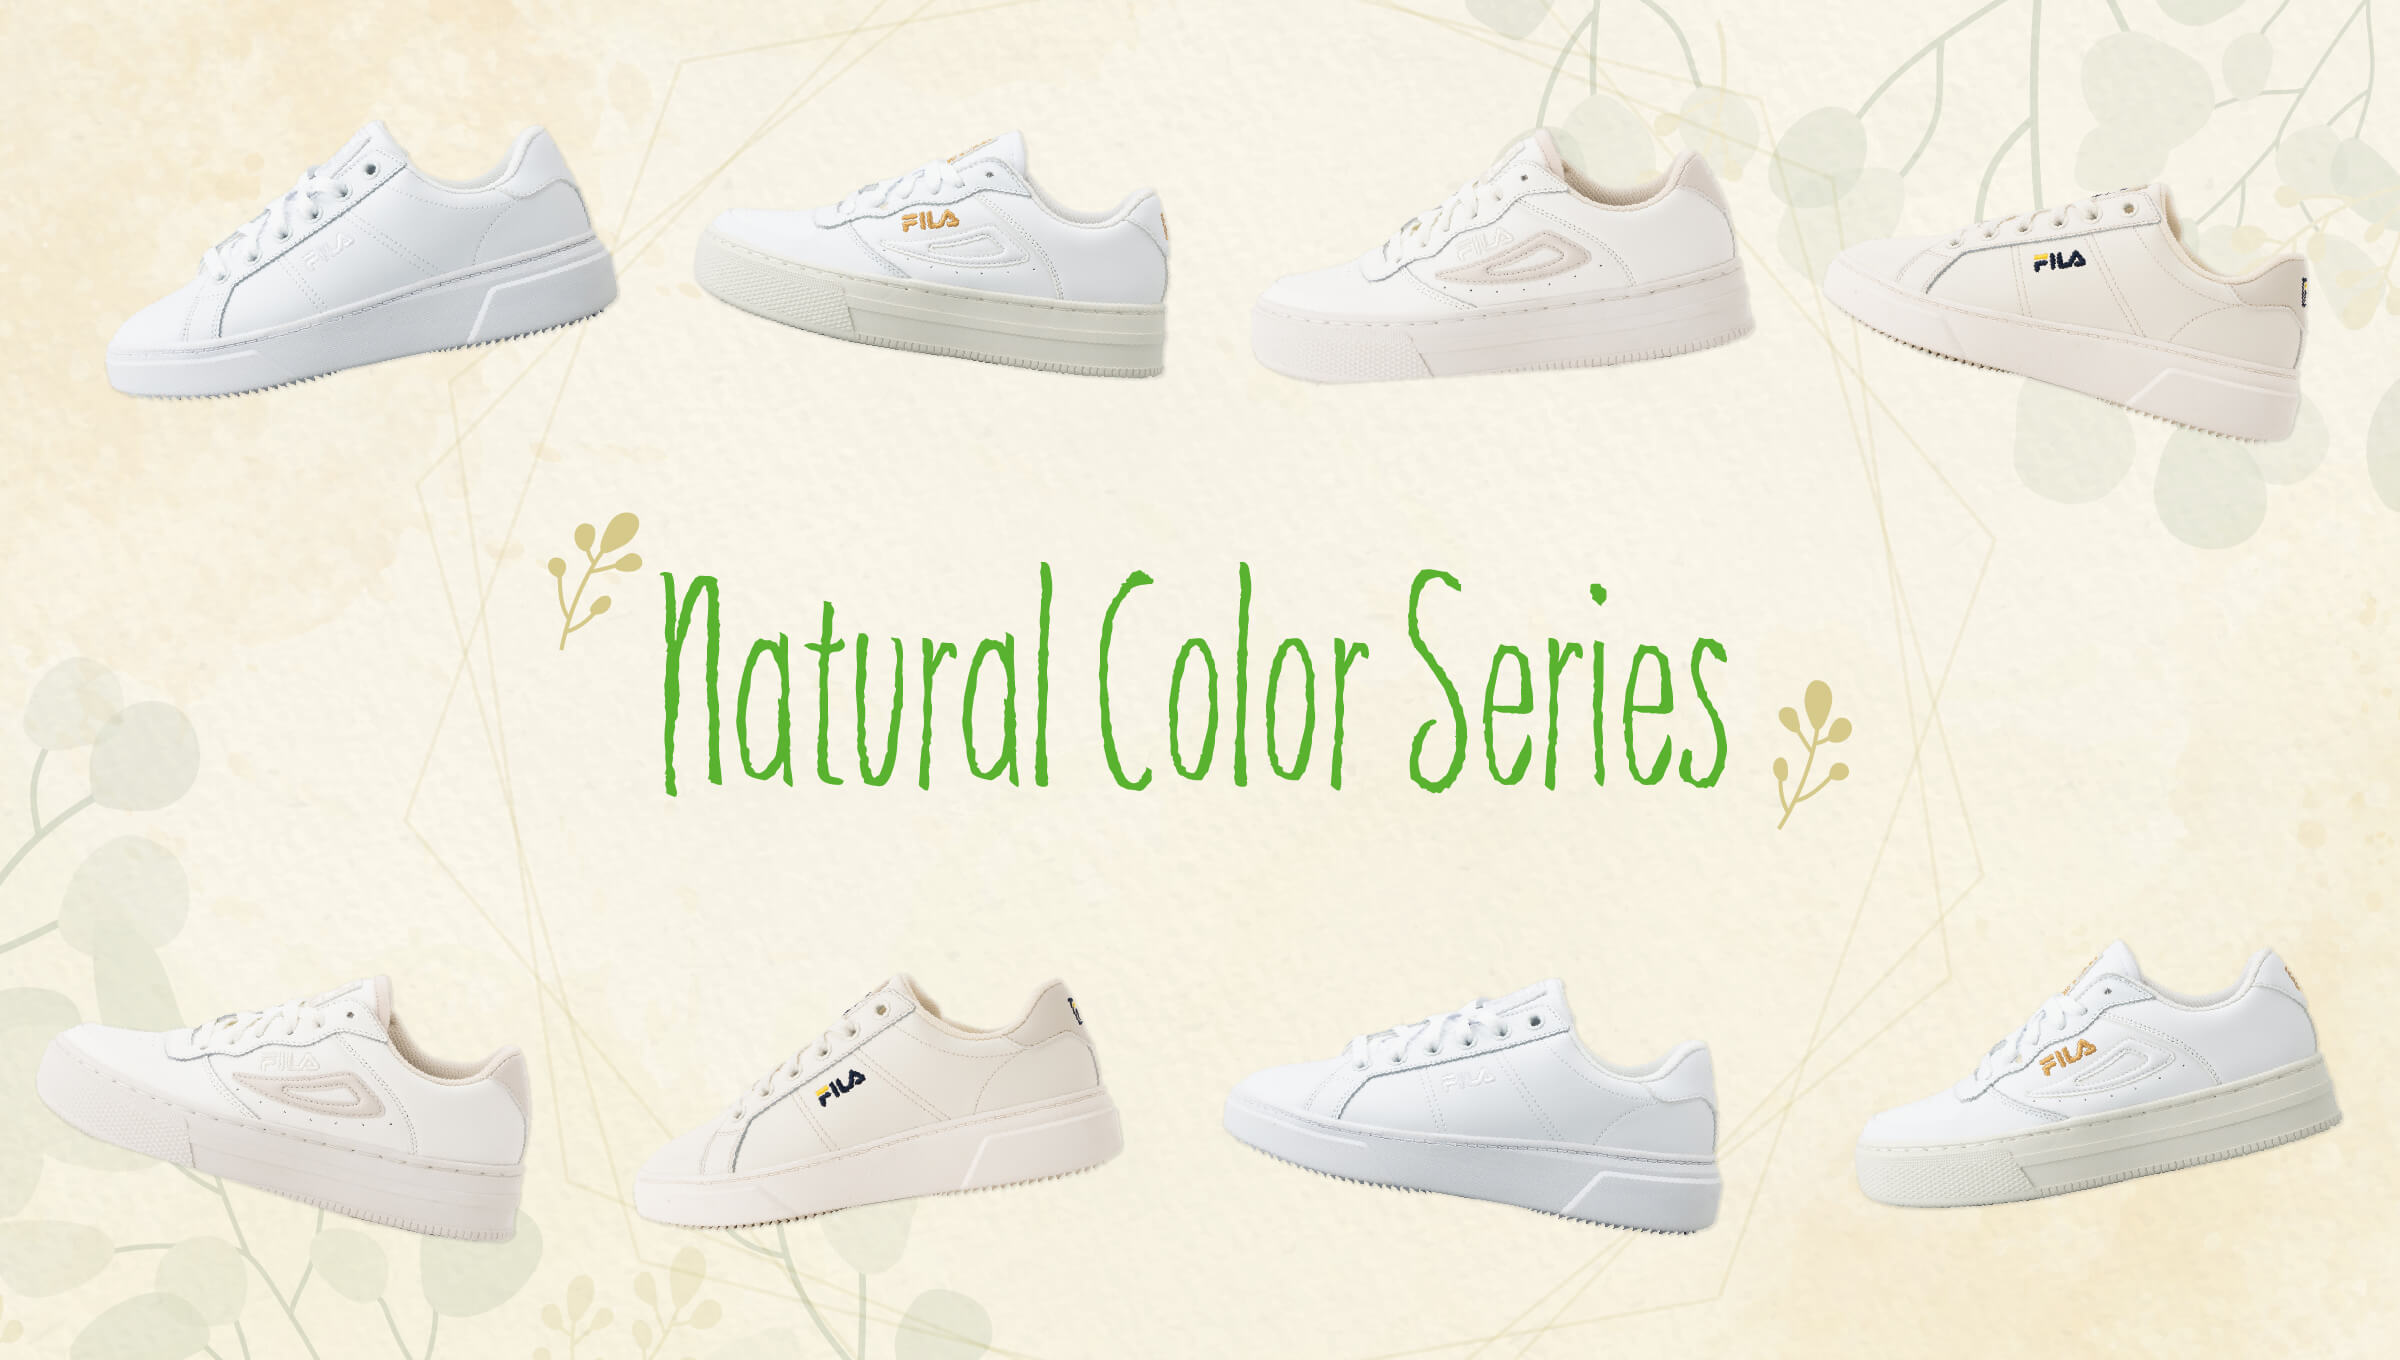 Natural color seriesがローンチ。